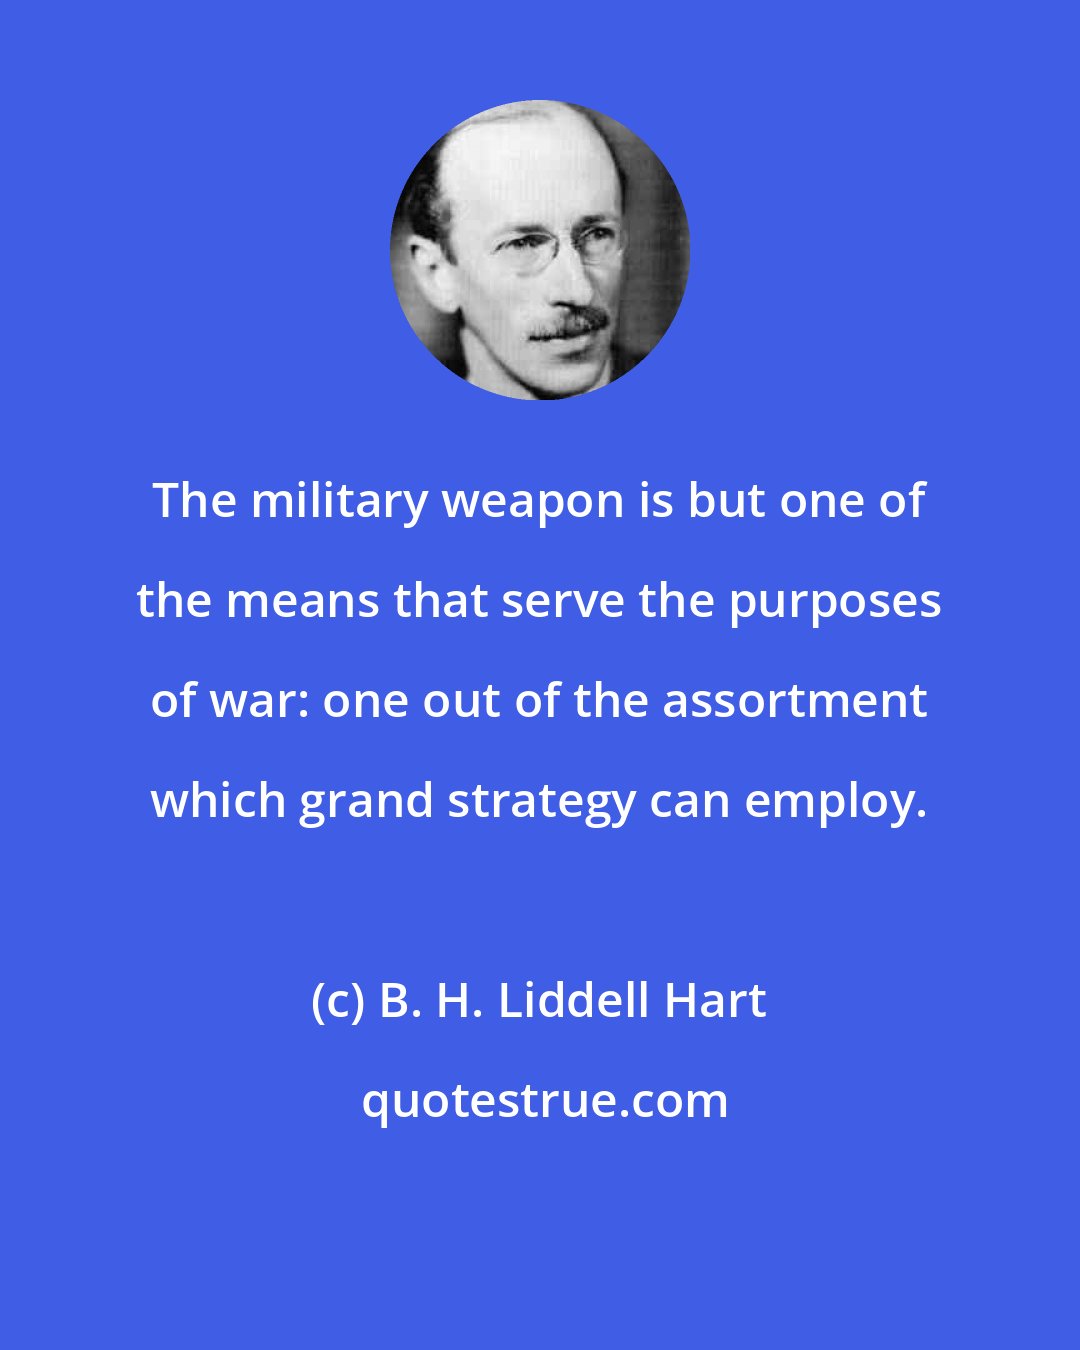 B. H. Liddell Hart: The military weapon is but one of the means that serve the purposes of war: one out of the assortment which grand strategy can employ.